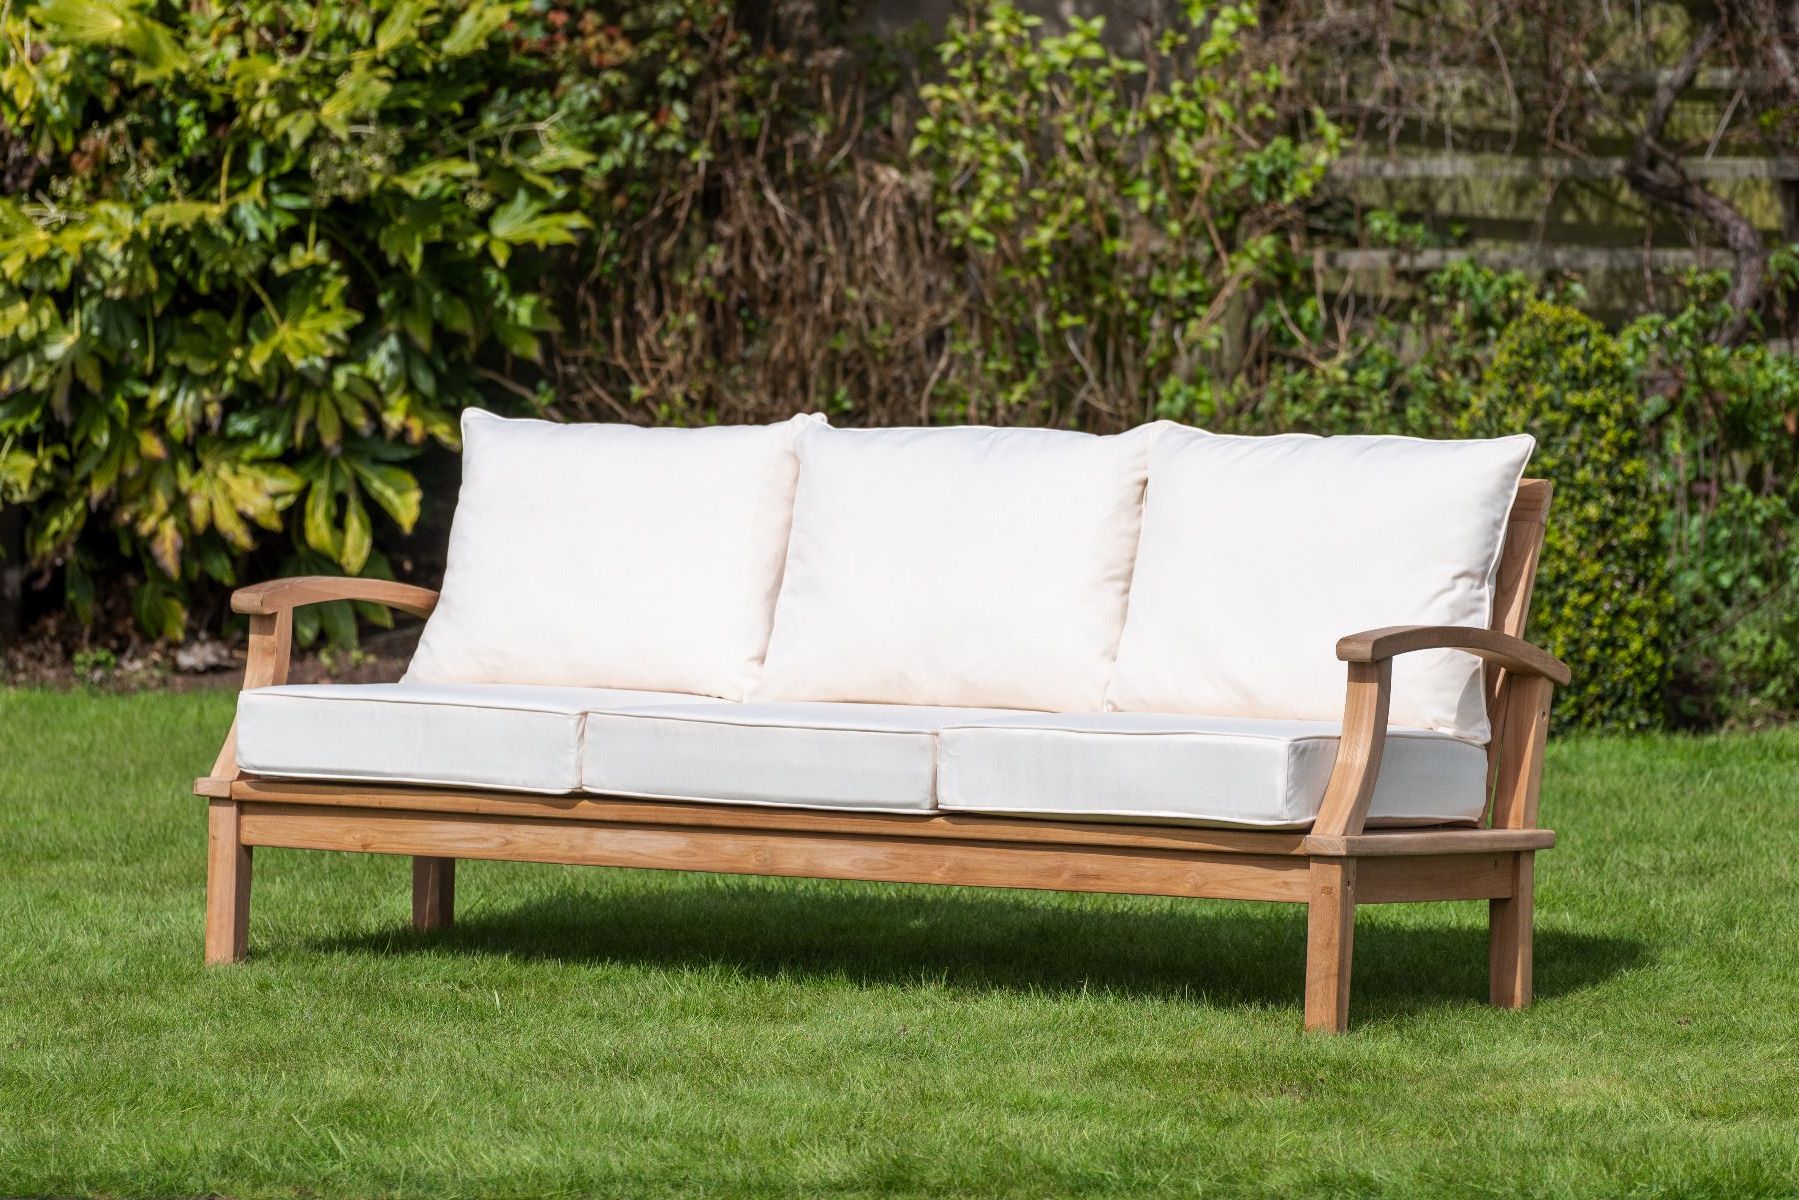 Sloane & Sons Within Wood Sofa Cushioned Outdoor Garden (View 2 of 15)